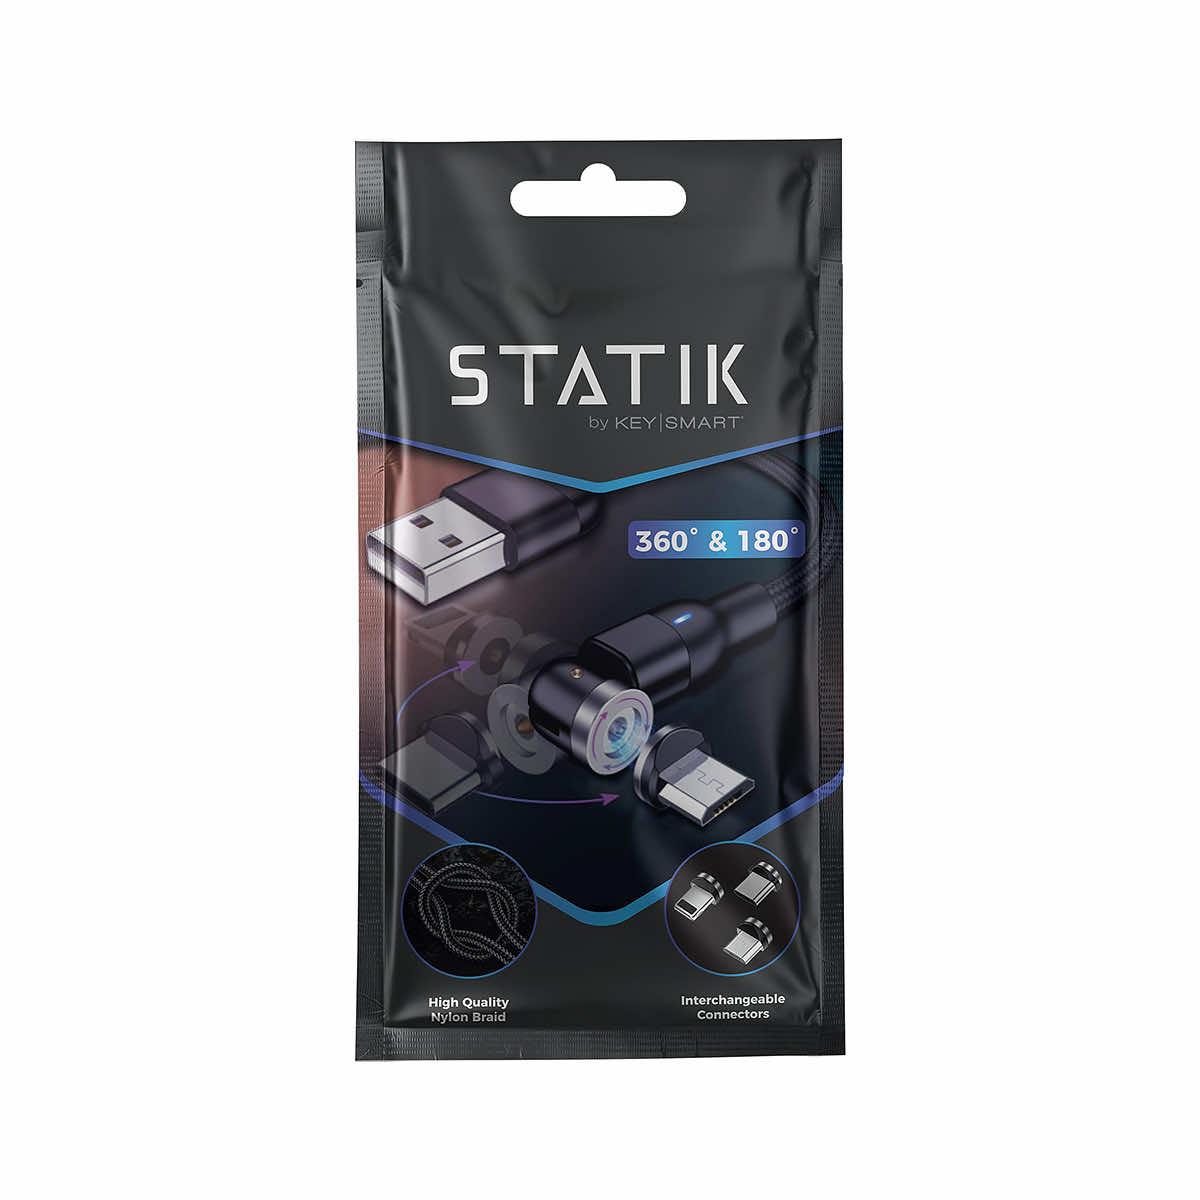 KeySmart Statik 360 Universal Charge Cable With 3 Connectors; 3ft/1M